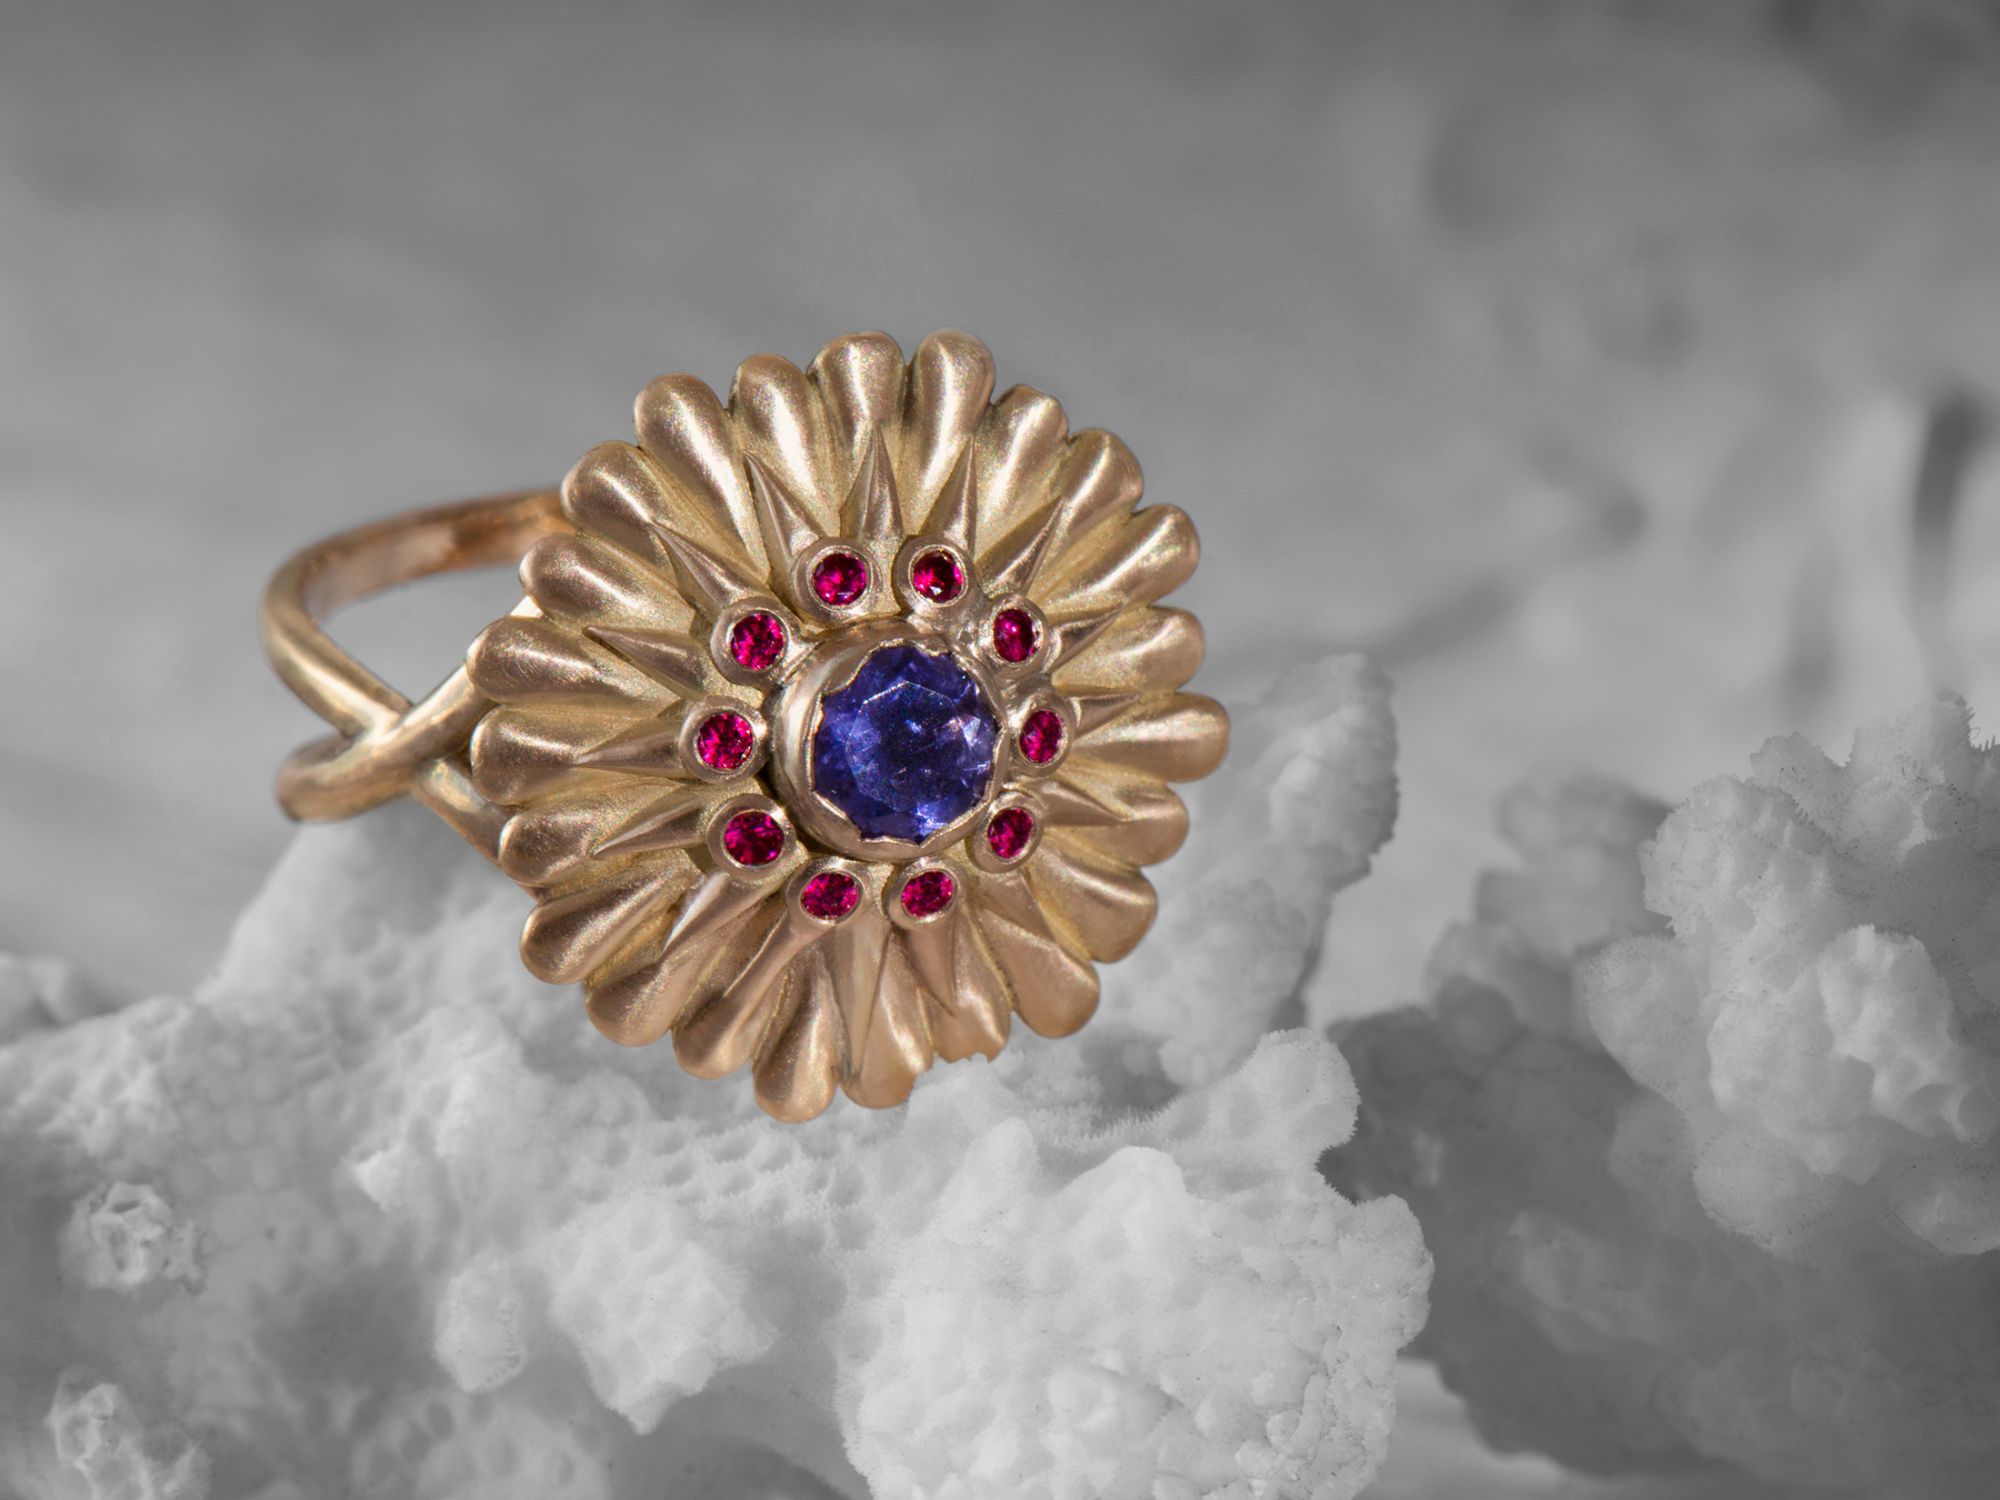 Sacha Iolite and rubies ring by Emmanuelle Zysman